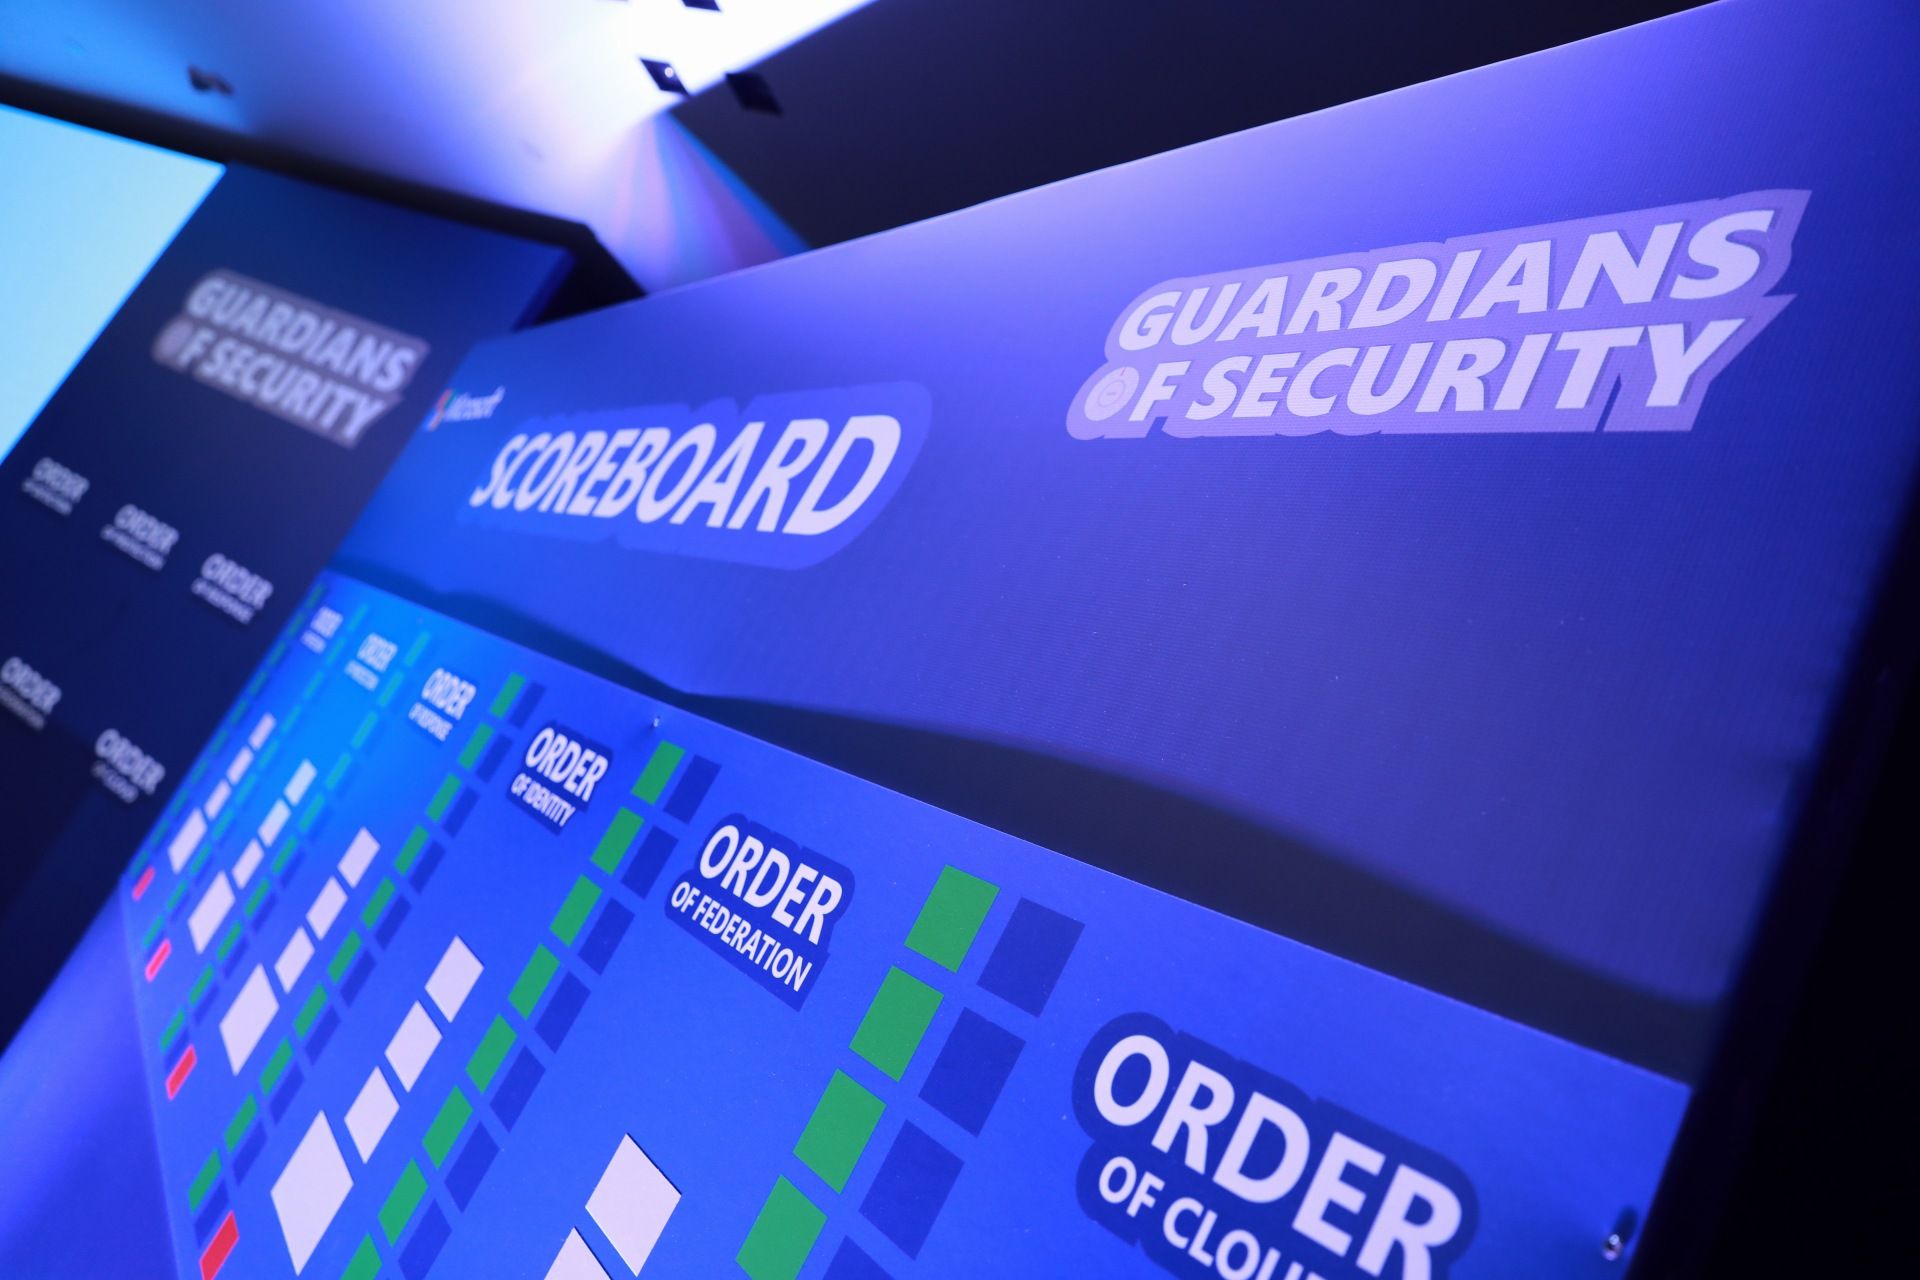 "Guardians of Security" - Microsoft's interactive exercise for cybersecurity guards